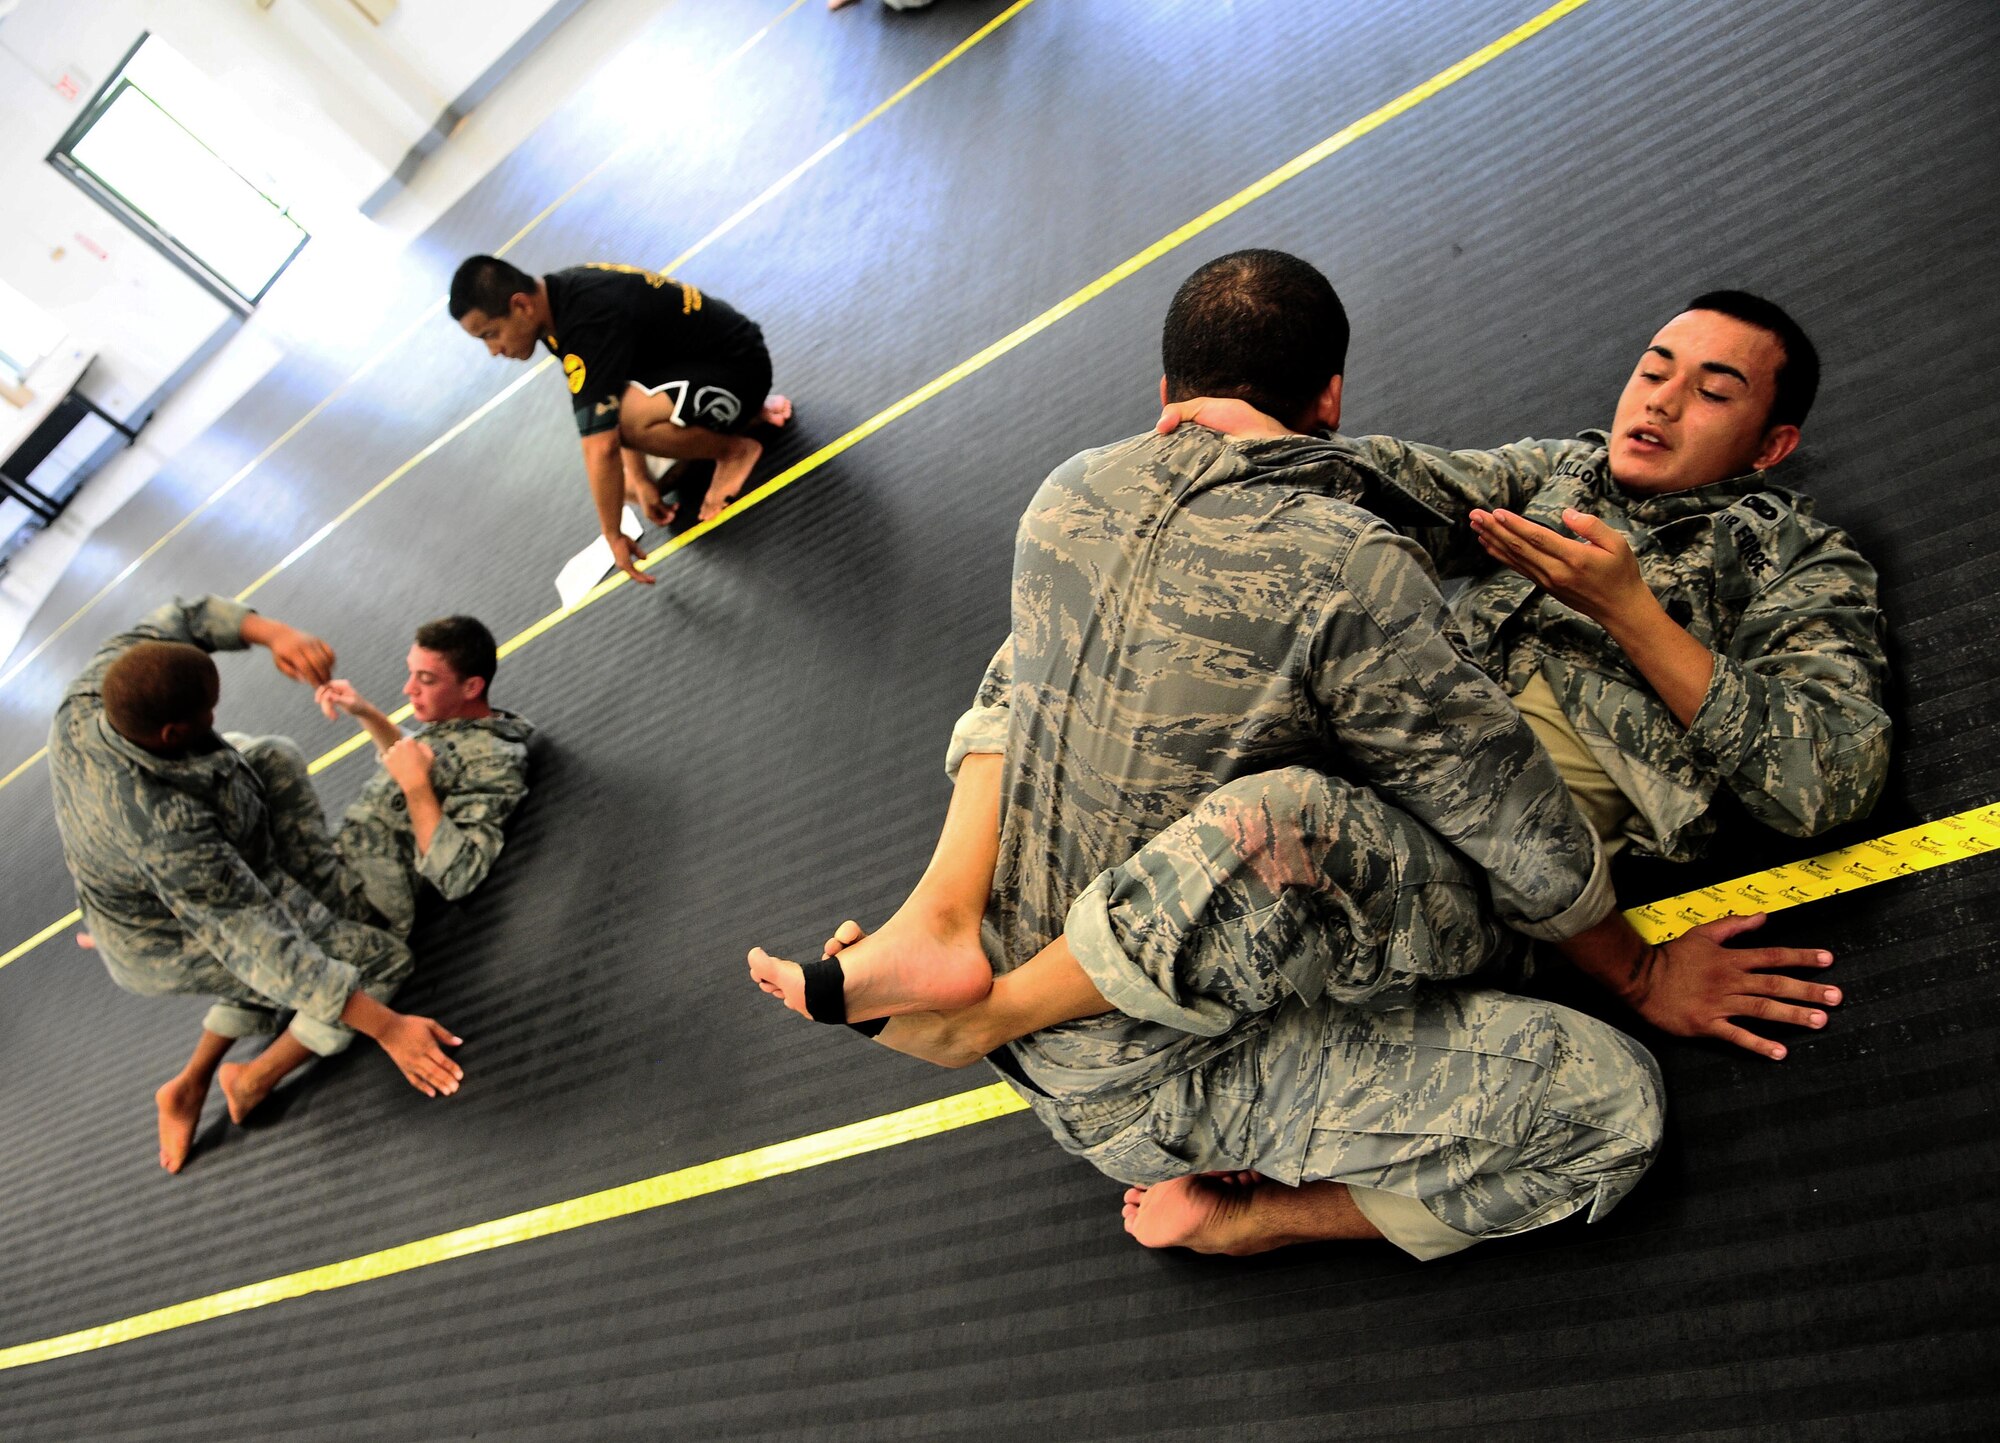 Airmen from the 736th Security Forces Squadron practice submission techniques during an Army Modern Combatives class hosted by the Guam Army National Guard at Fort Juan Muna, Oct. 20. The Airmen learned various styles of combative techniques including Jujitsu and grappling. (U.S. Air Force/Airman Jeffrey Schultze/Released)